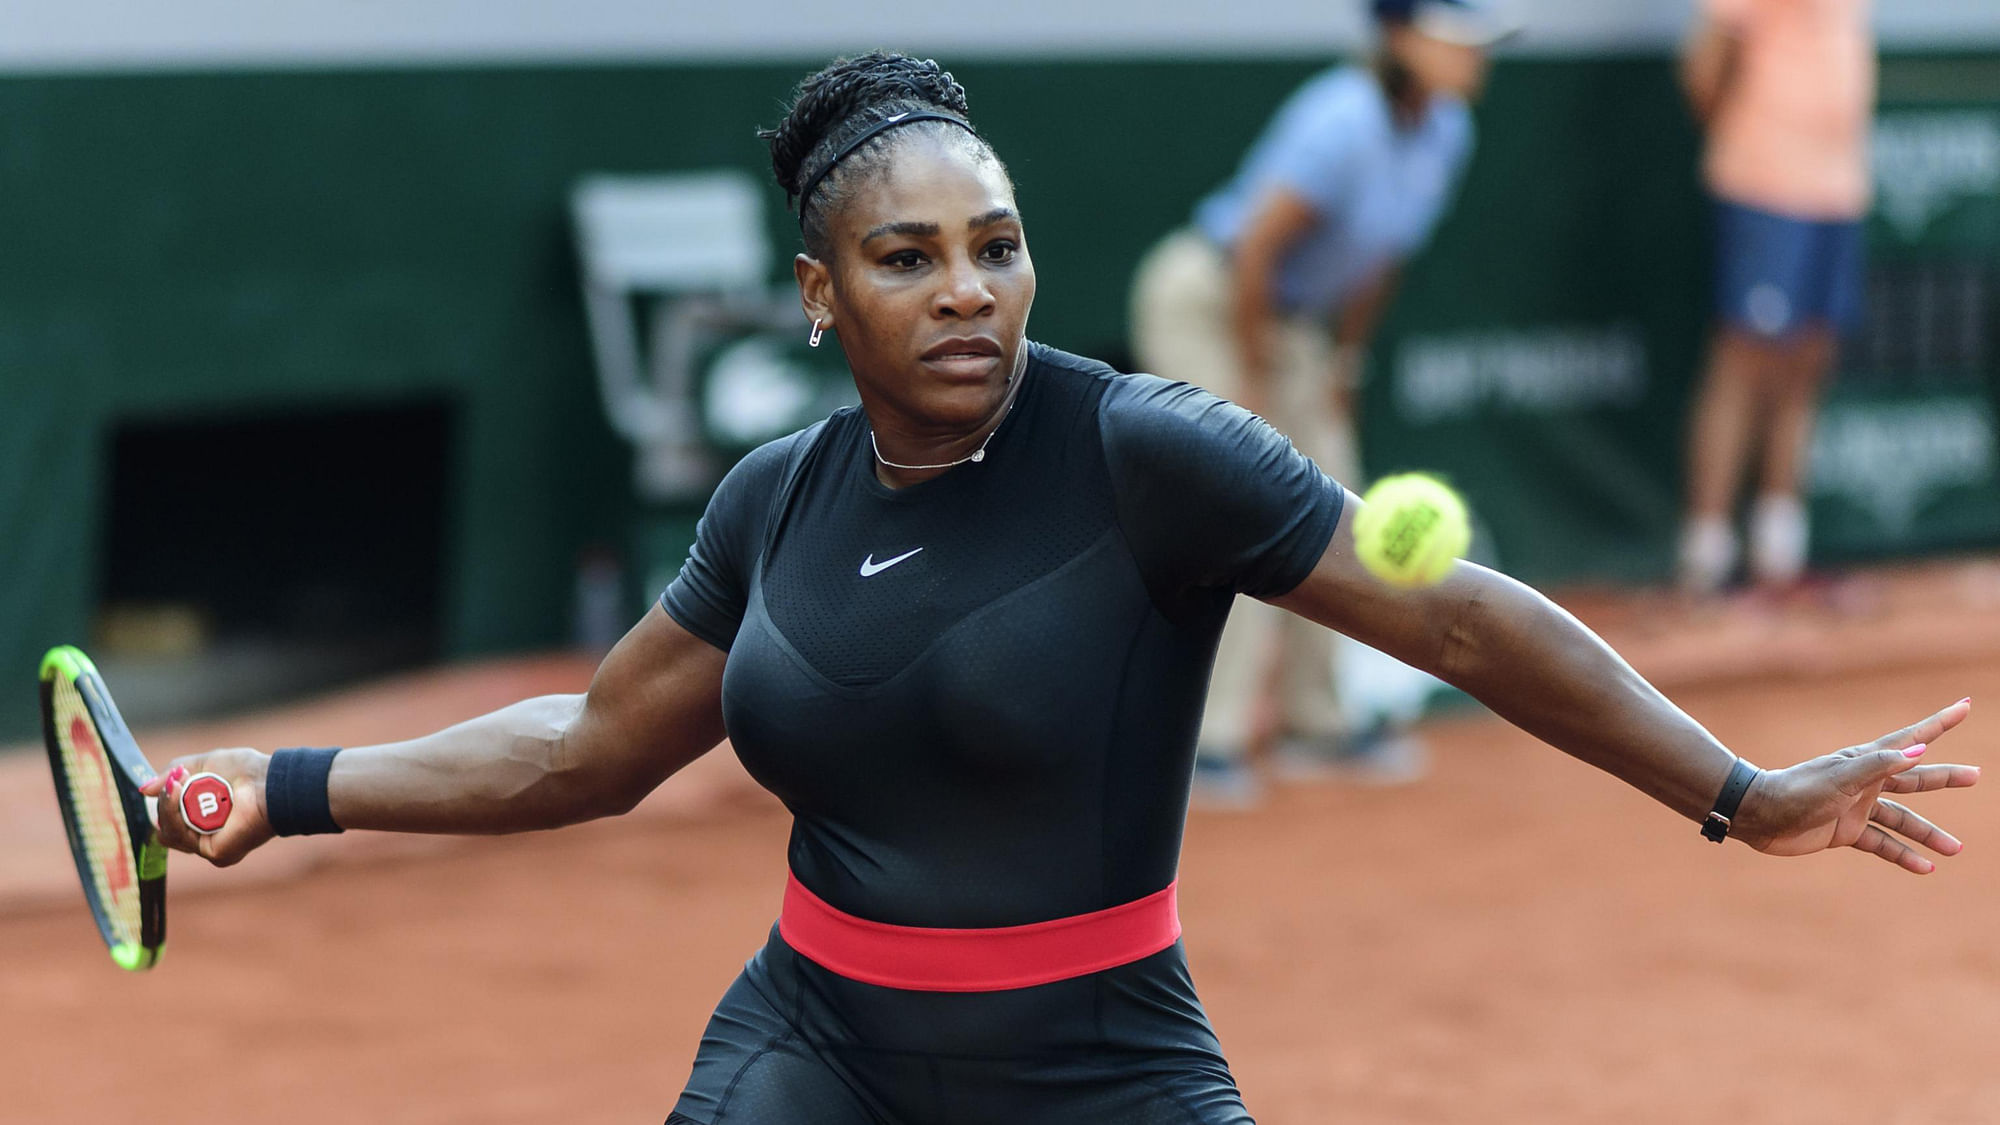 Serena Williams has been banned from wearing this black catsuit at the French Open again.